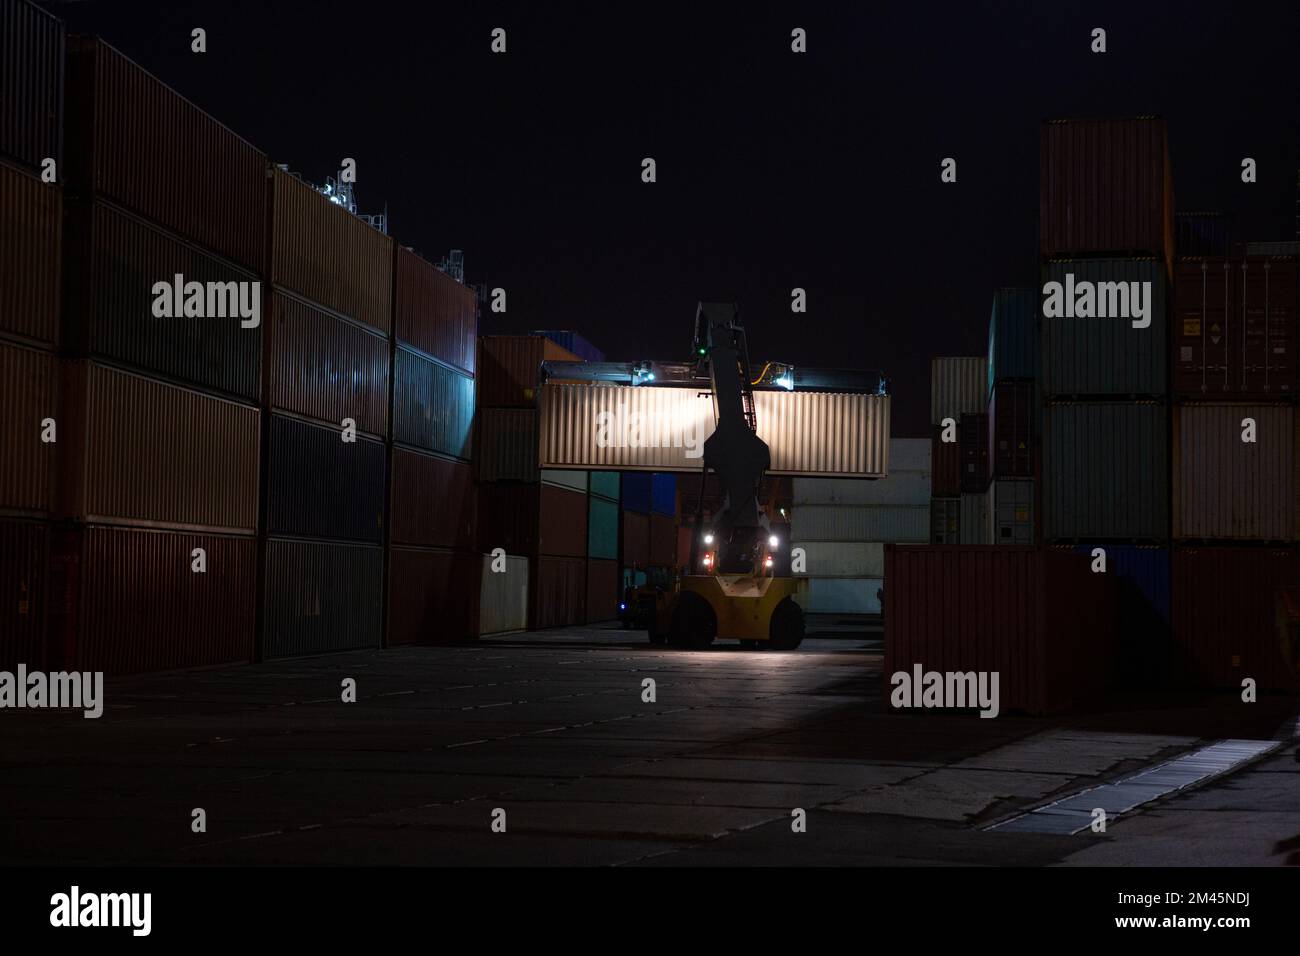 Reach Stacker during operation. Reach-stacker container loader during night work. Industrial port container terminal. Container stacker in the port at Stock Photo